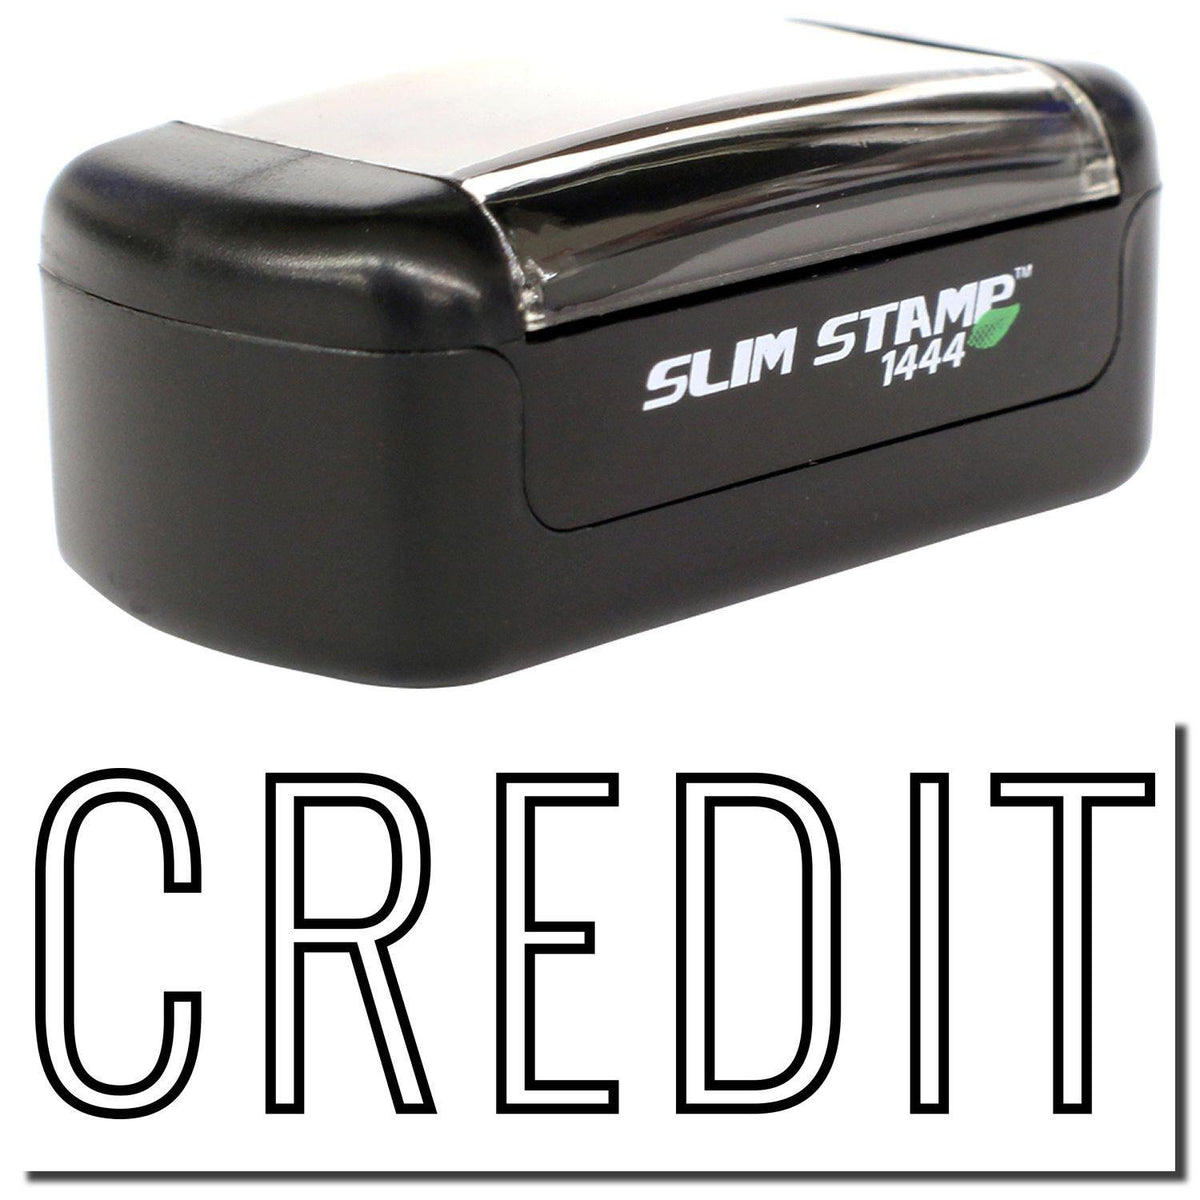 A stock office pre-inked stamp with a stamped image showing how the text &quot;CREDIT&quot; in an outline font is displayed after stamping.